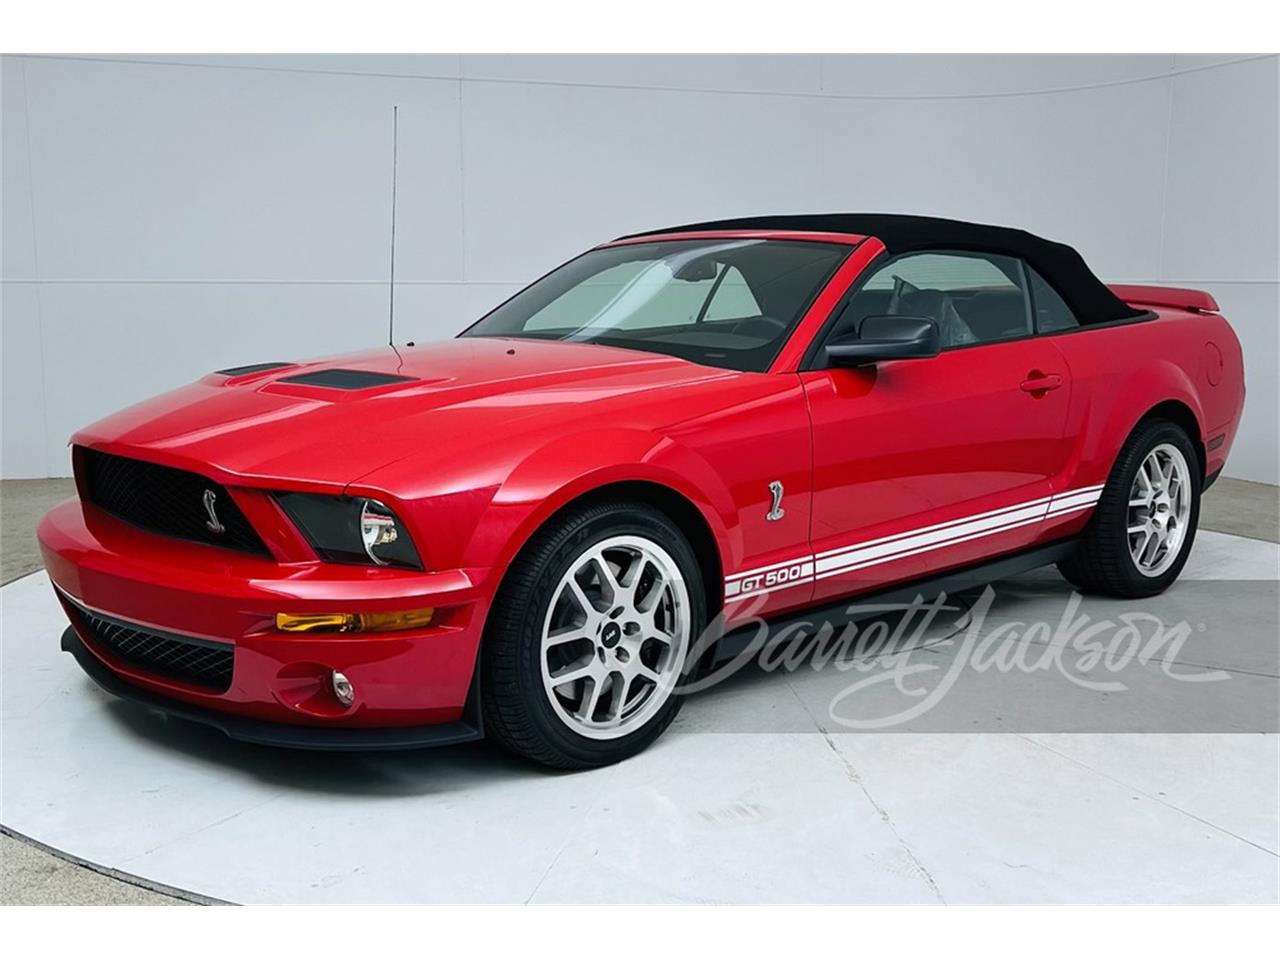 For Sale at Auction: 2007 Shelby GT500 in Scottsdale, Arizona for sale in Scottsdale, AZ